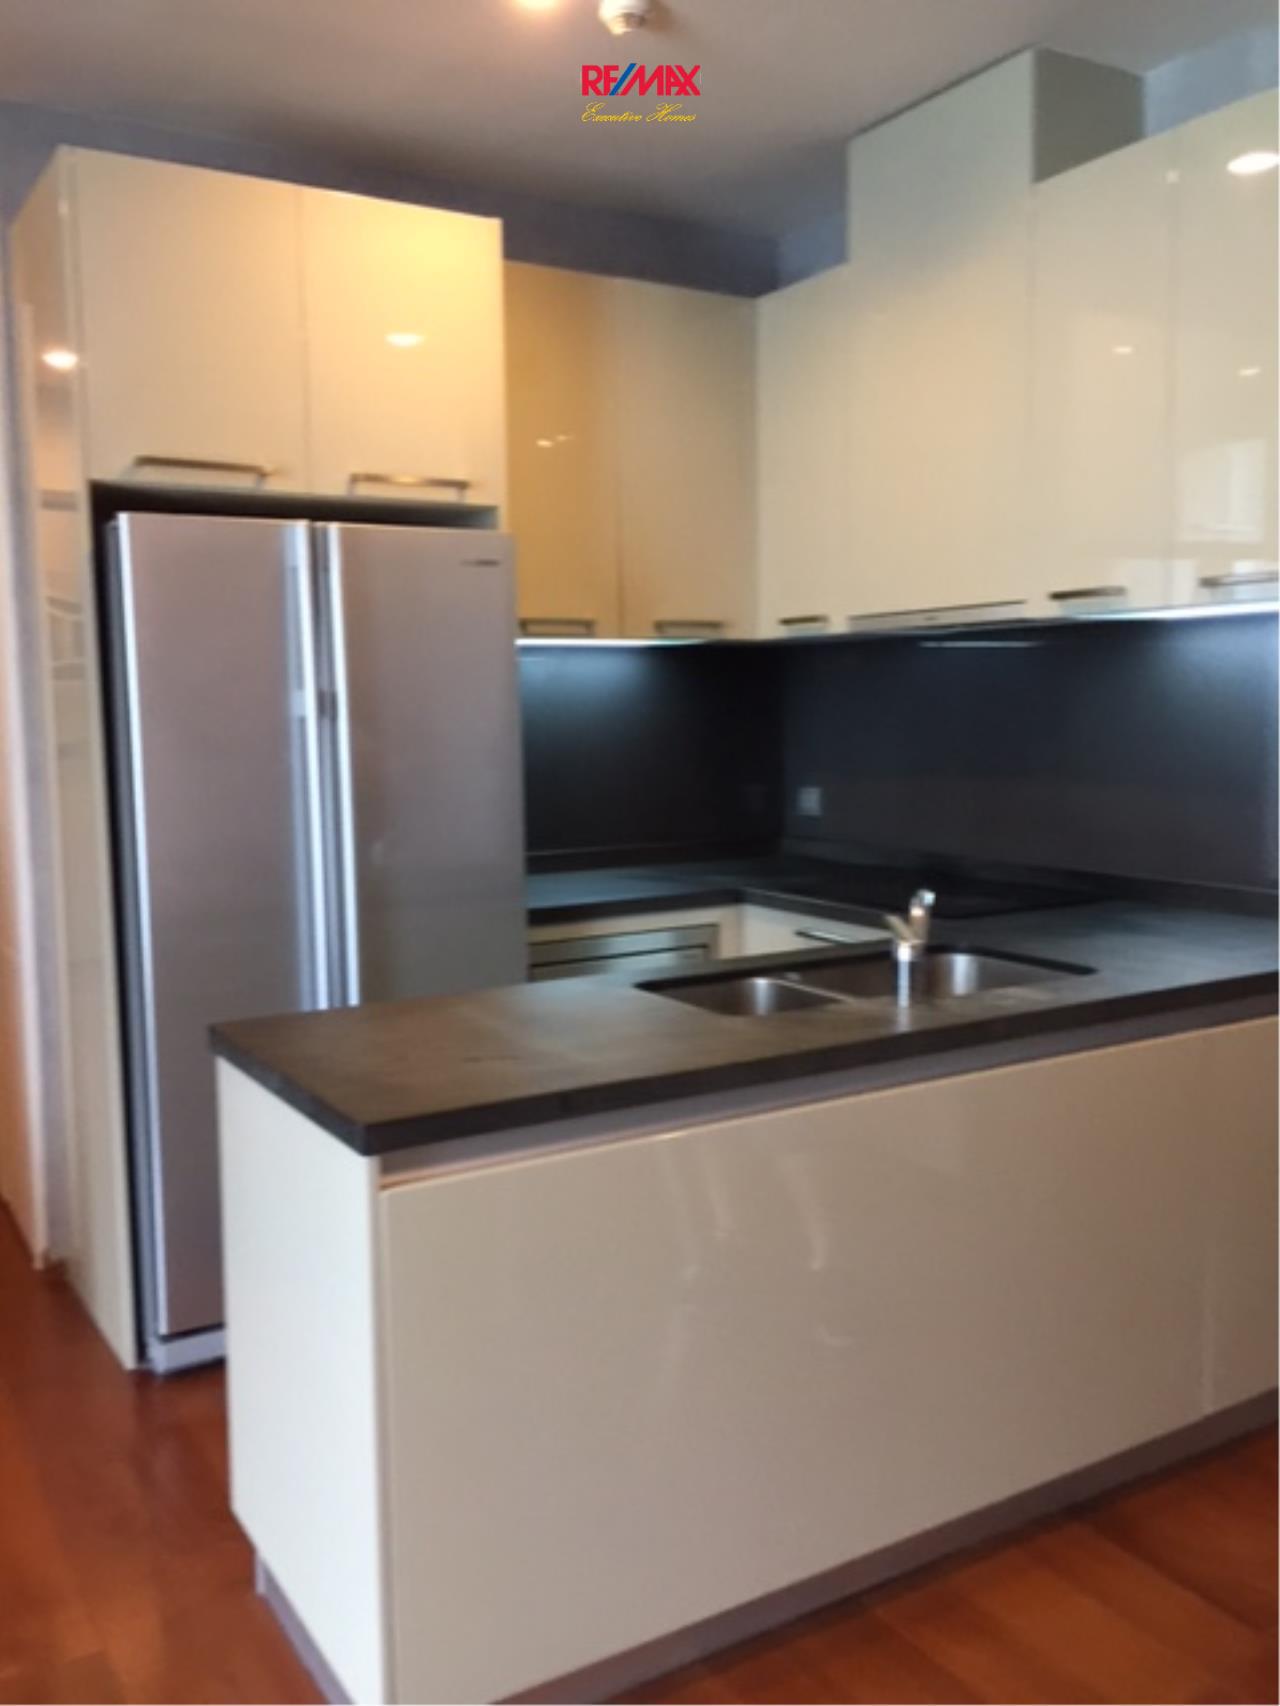 RE/MAX Executive Homes Agency's Beautiful 2 Bedroom for Rent Quattro Thonglor 8